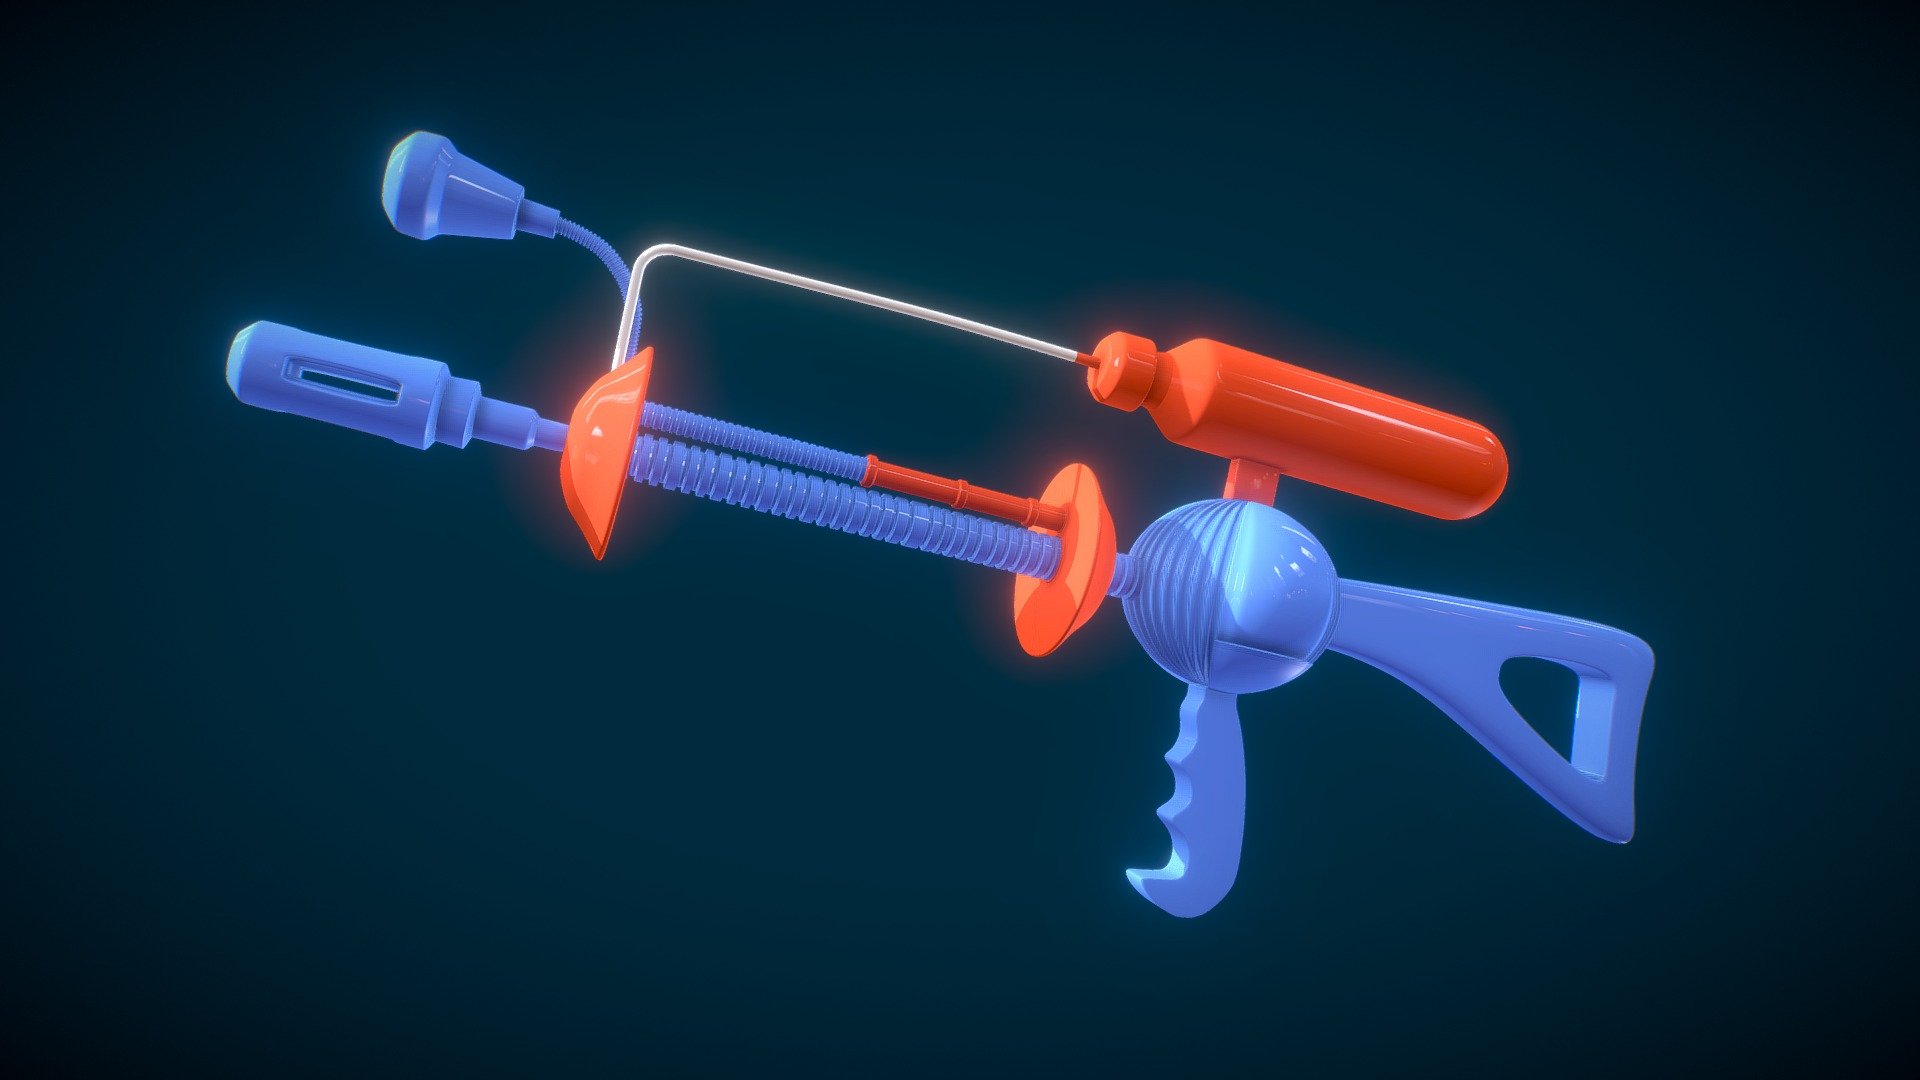 Modeling Weapon Mars Attack - Weapon Mars Attack - 3D model by Cristian_Otero 3d model